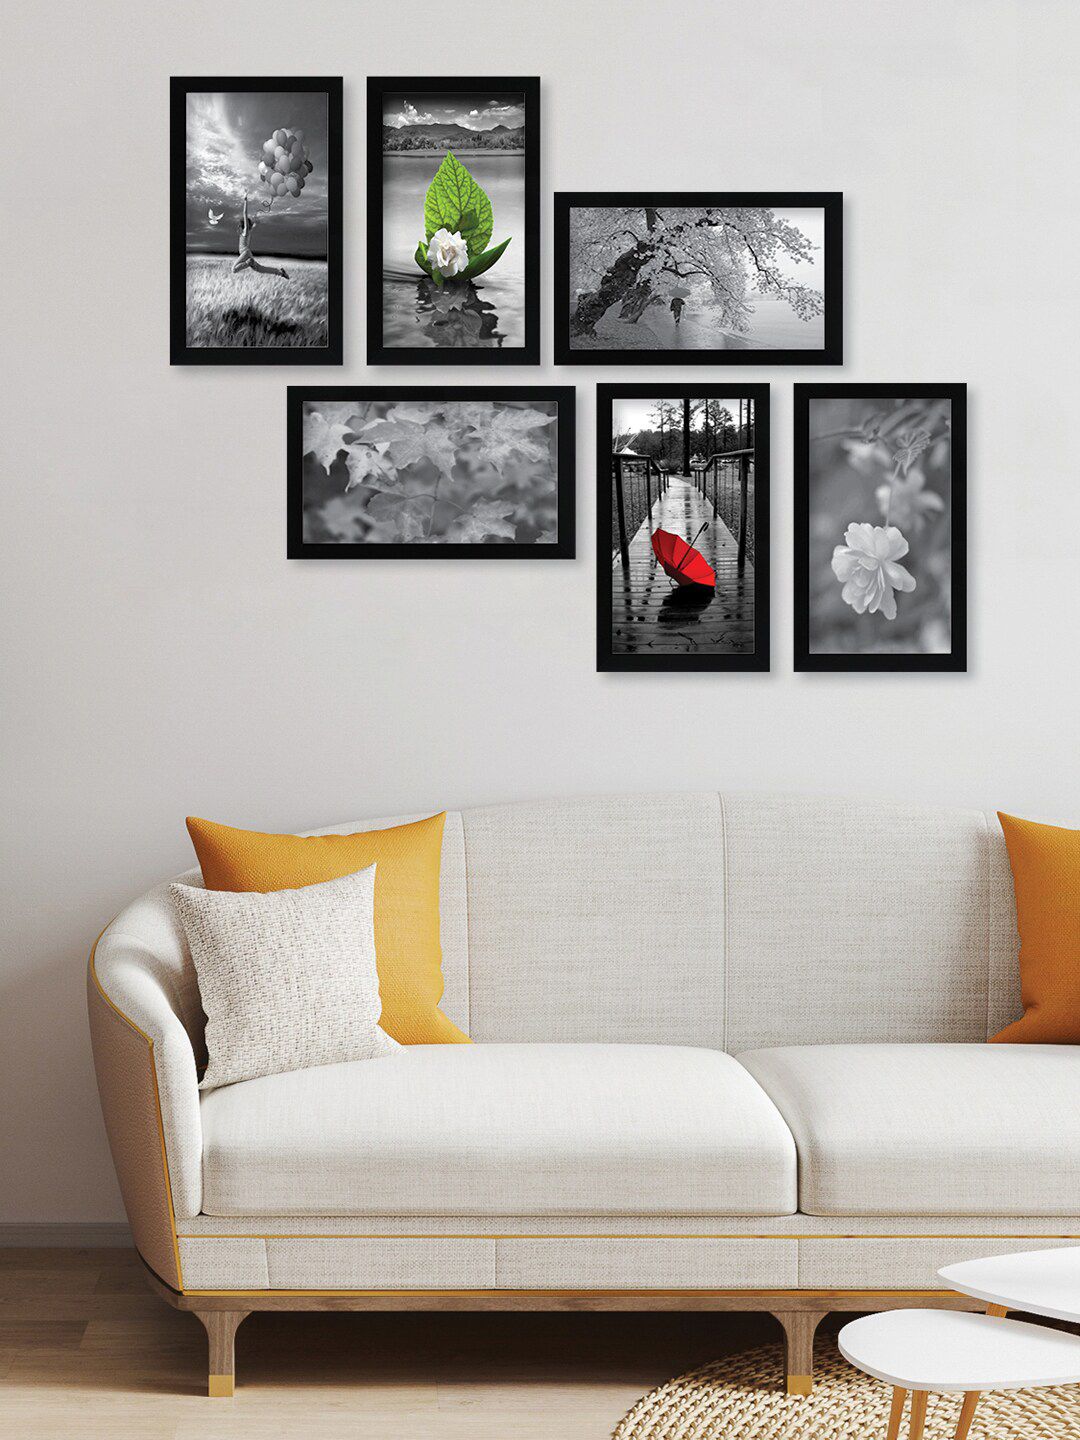 RANDOM Set Of 6 Black Solid Wall Photo Frames Price in India